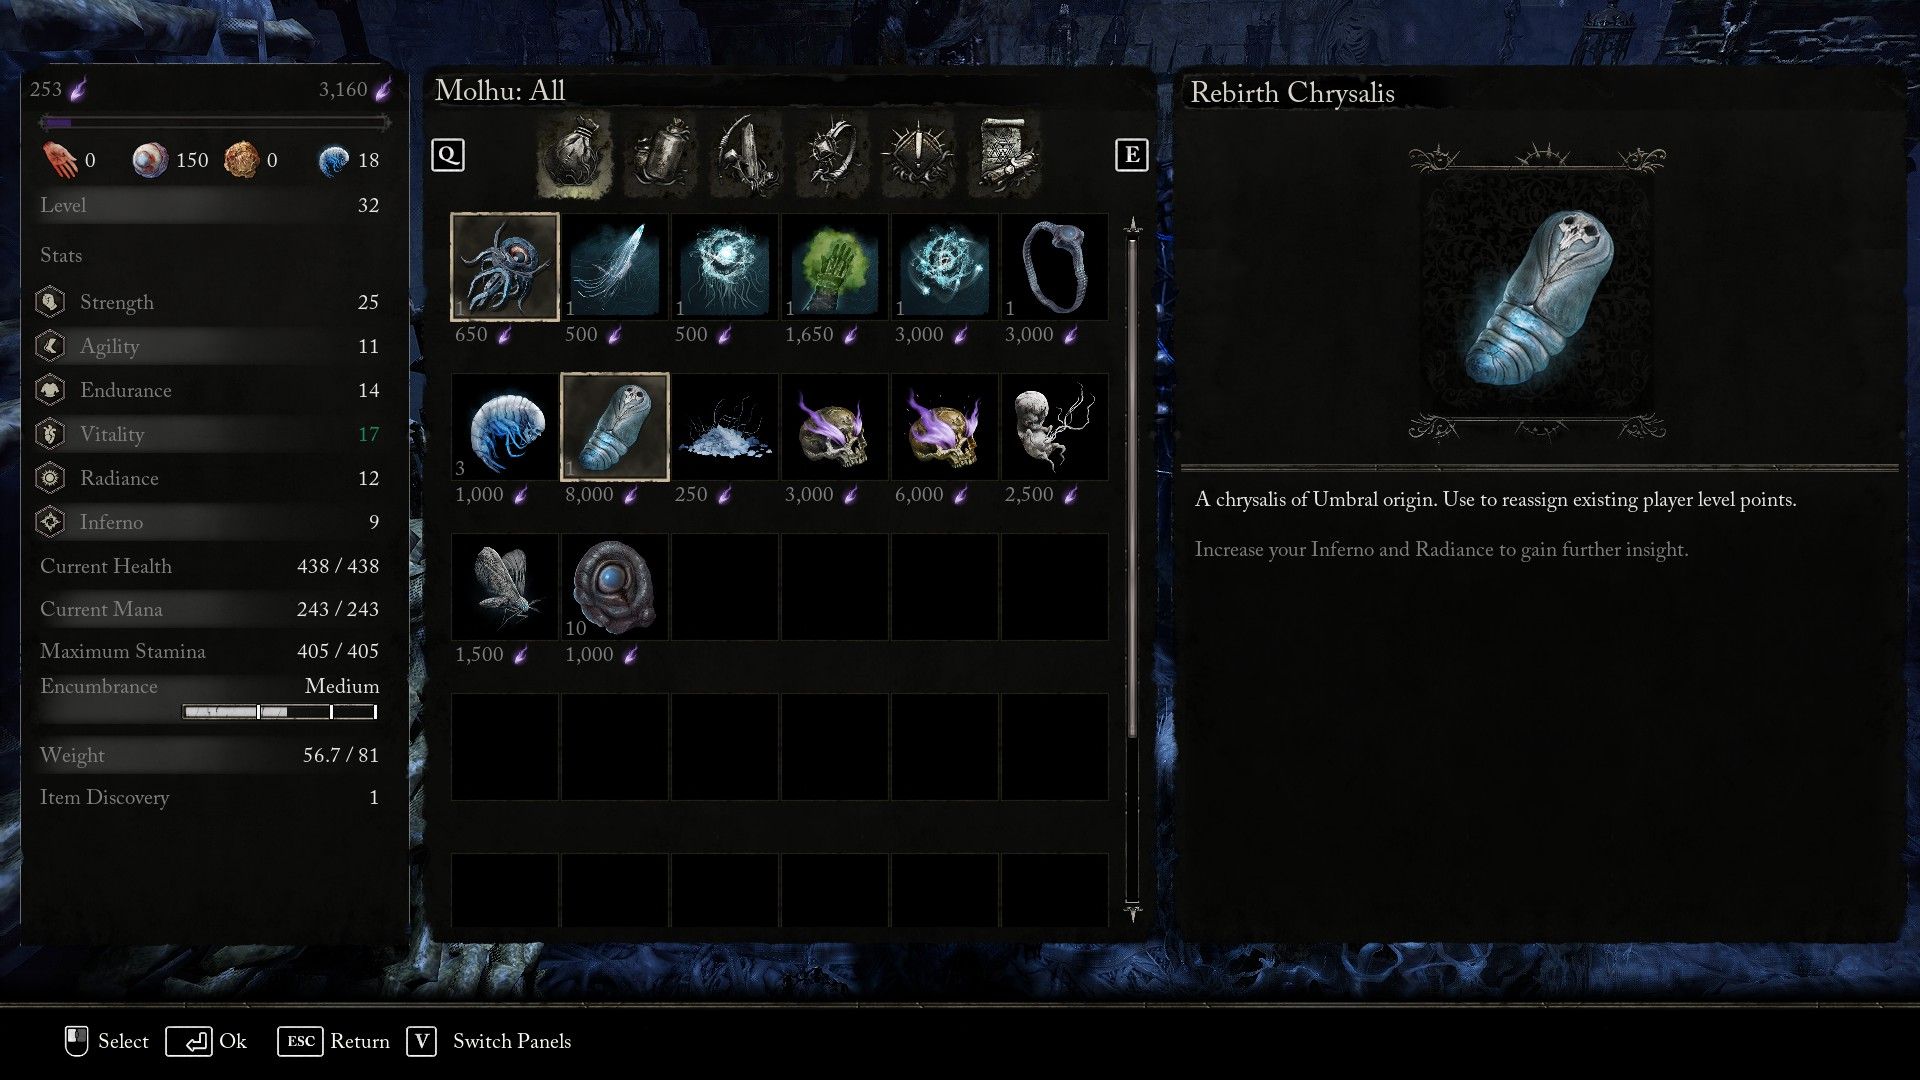 Rebirth Chrysalis respec item in Lords of the Fallen